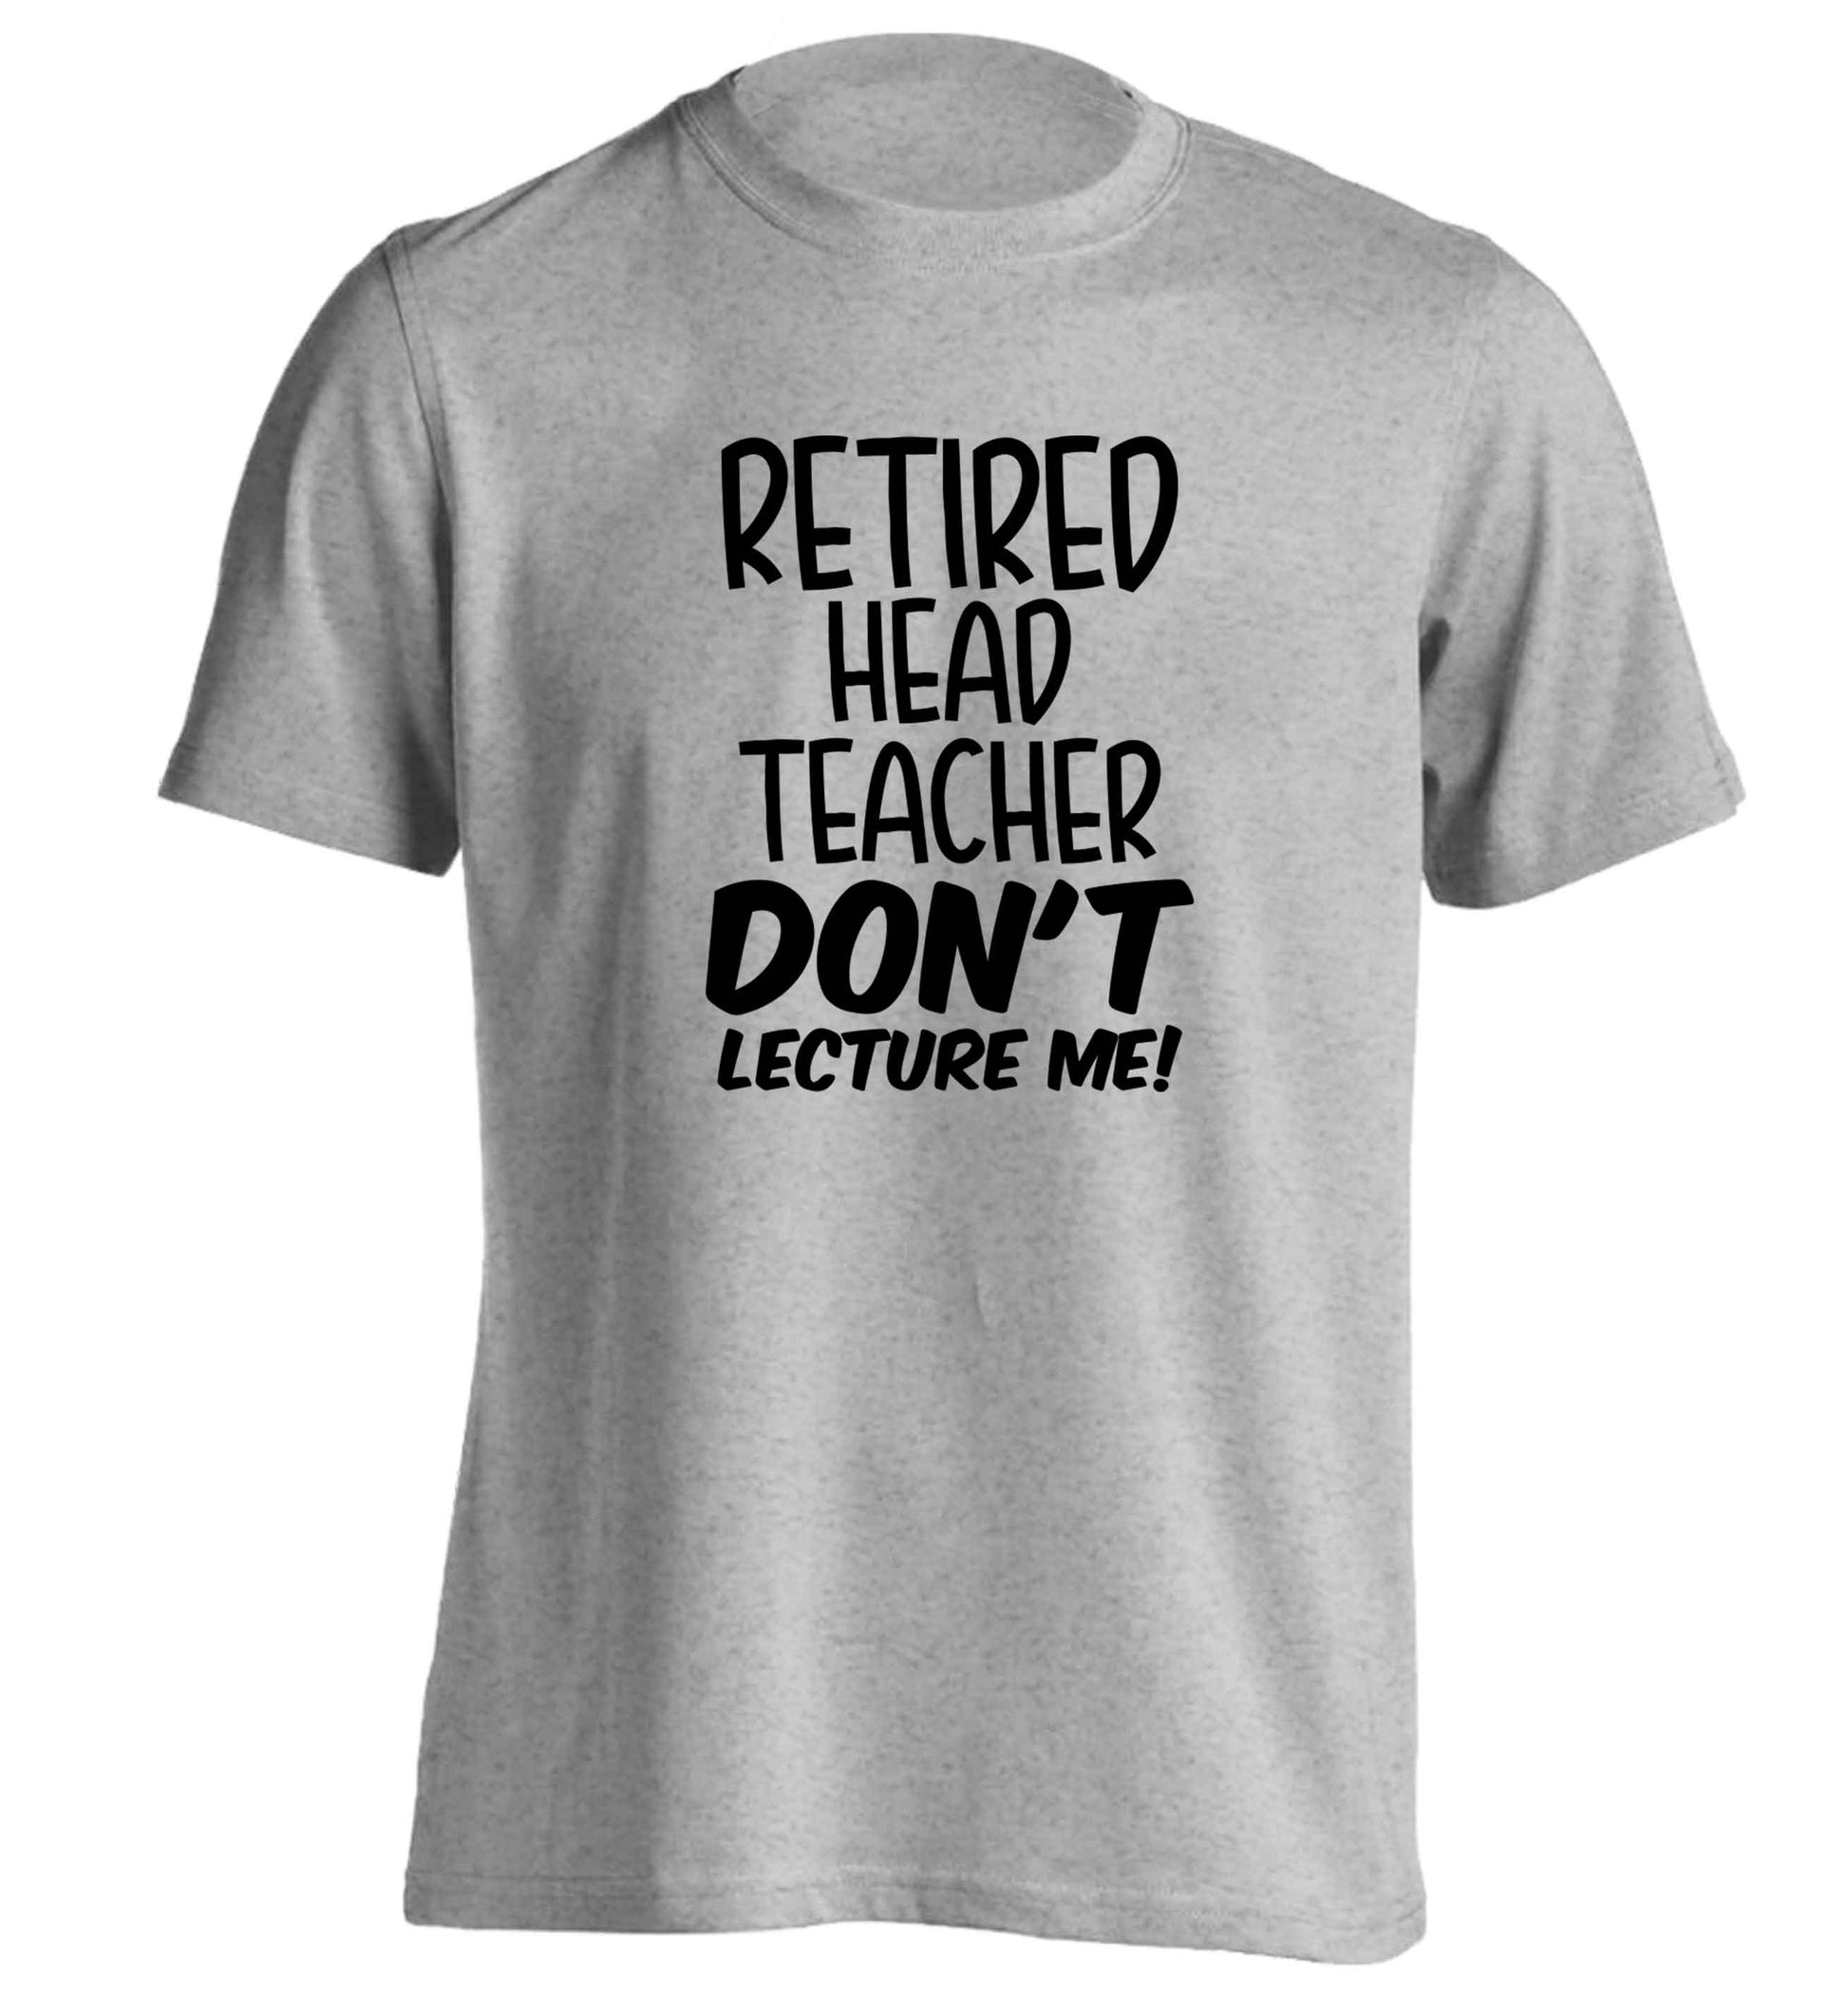 Retired head teacher don't lecture me! adults unisex grey Tshirt 2XL